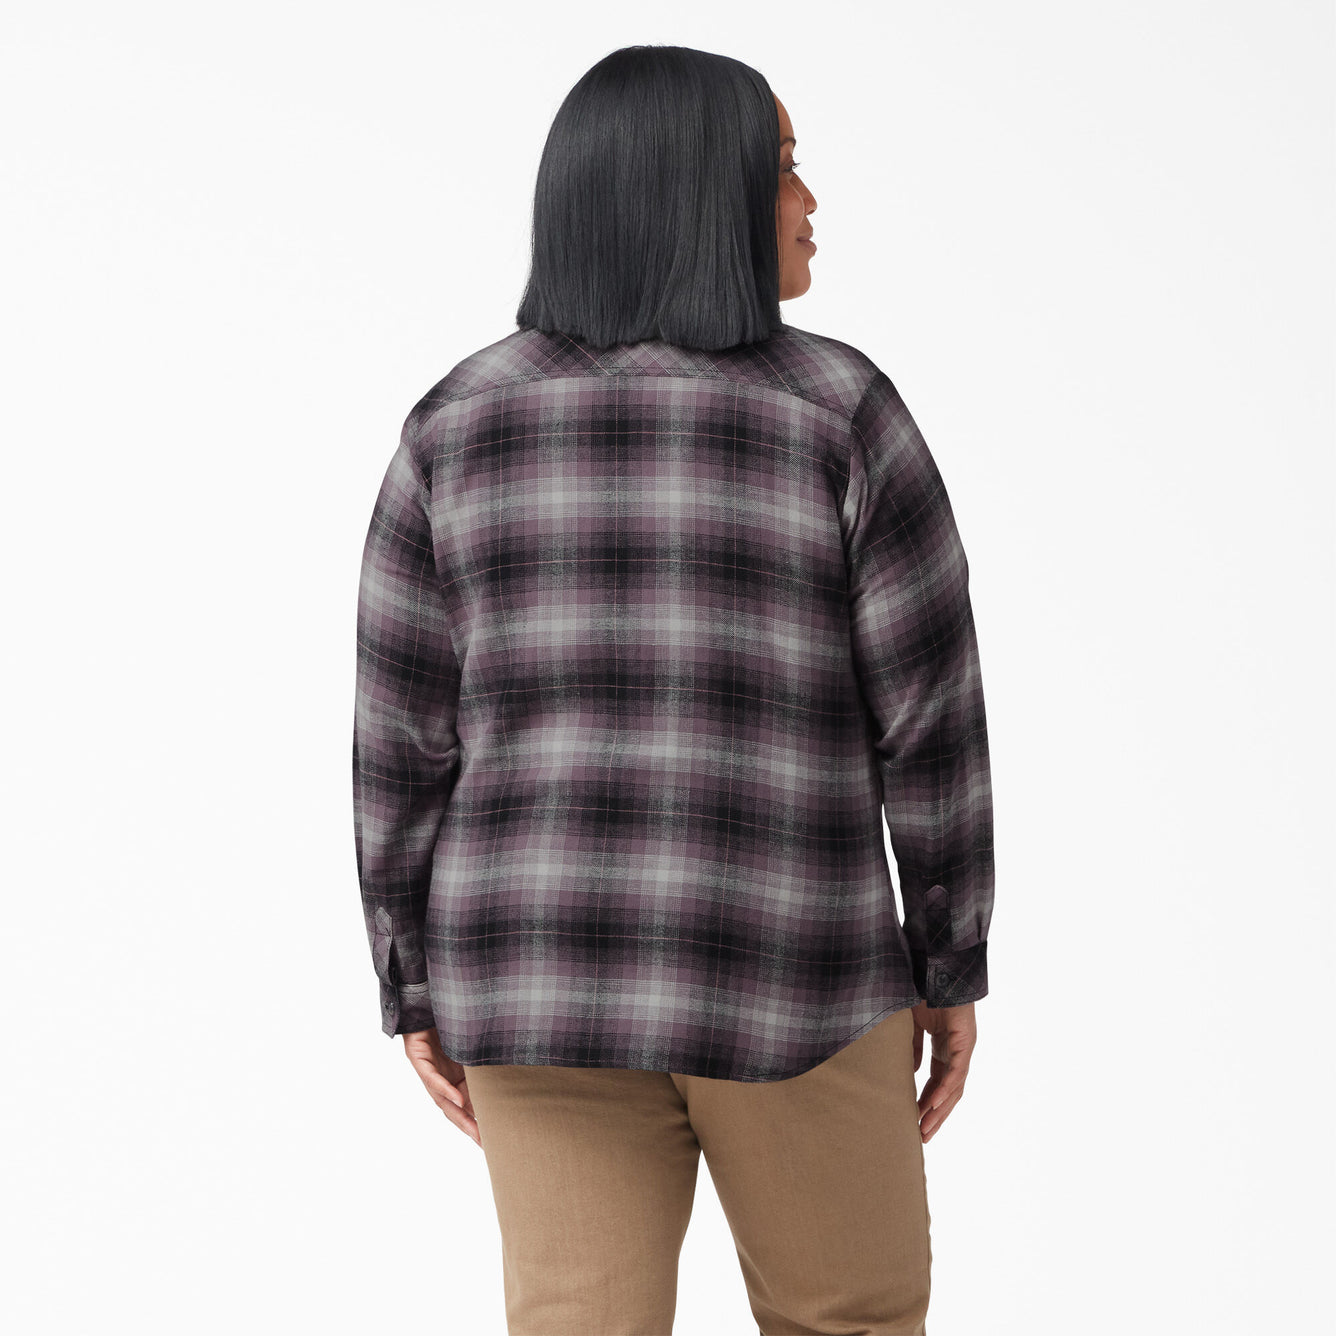 Dickies  -  #FLW075 - Made to Fit the Curvy Girl - Women's Plus Size Long Sleeve Plaid Flannel Work Shirt